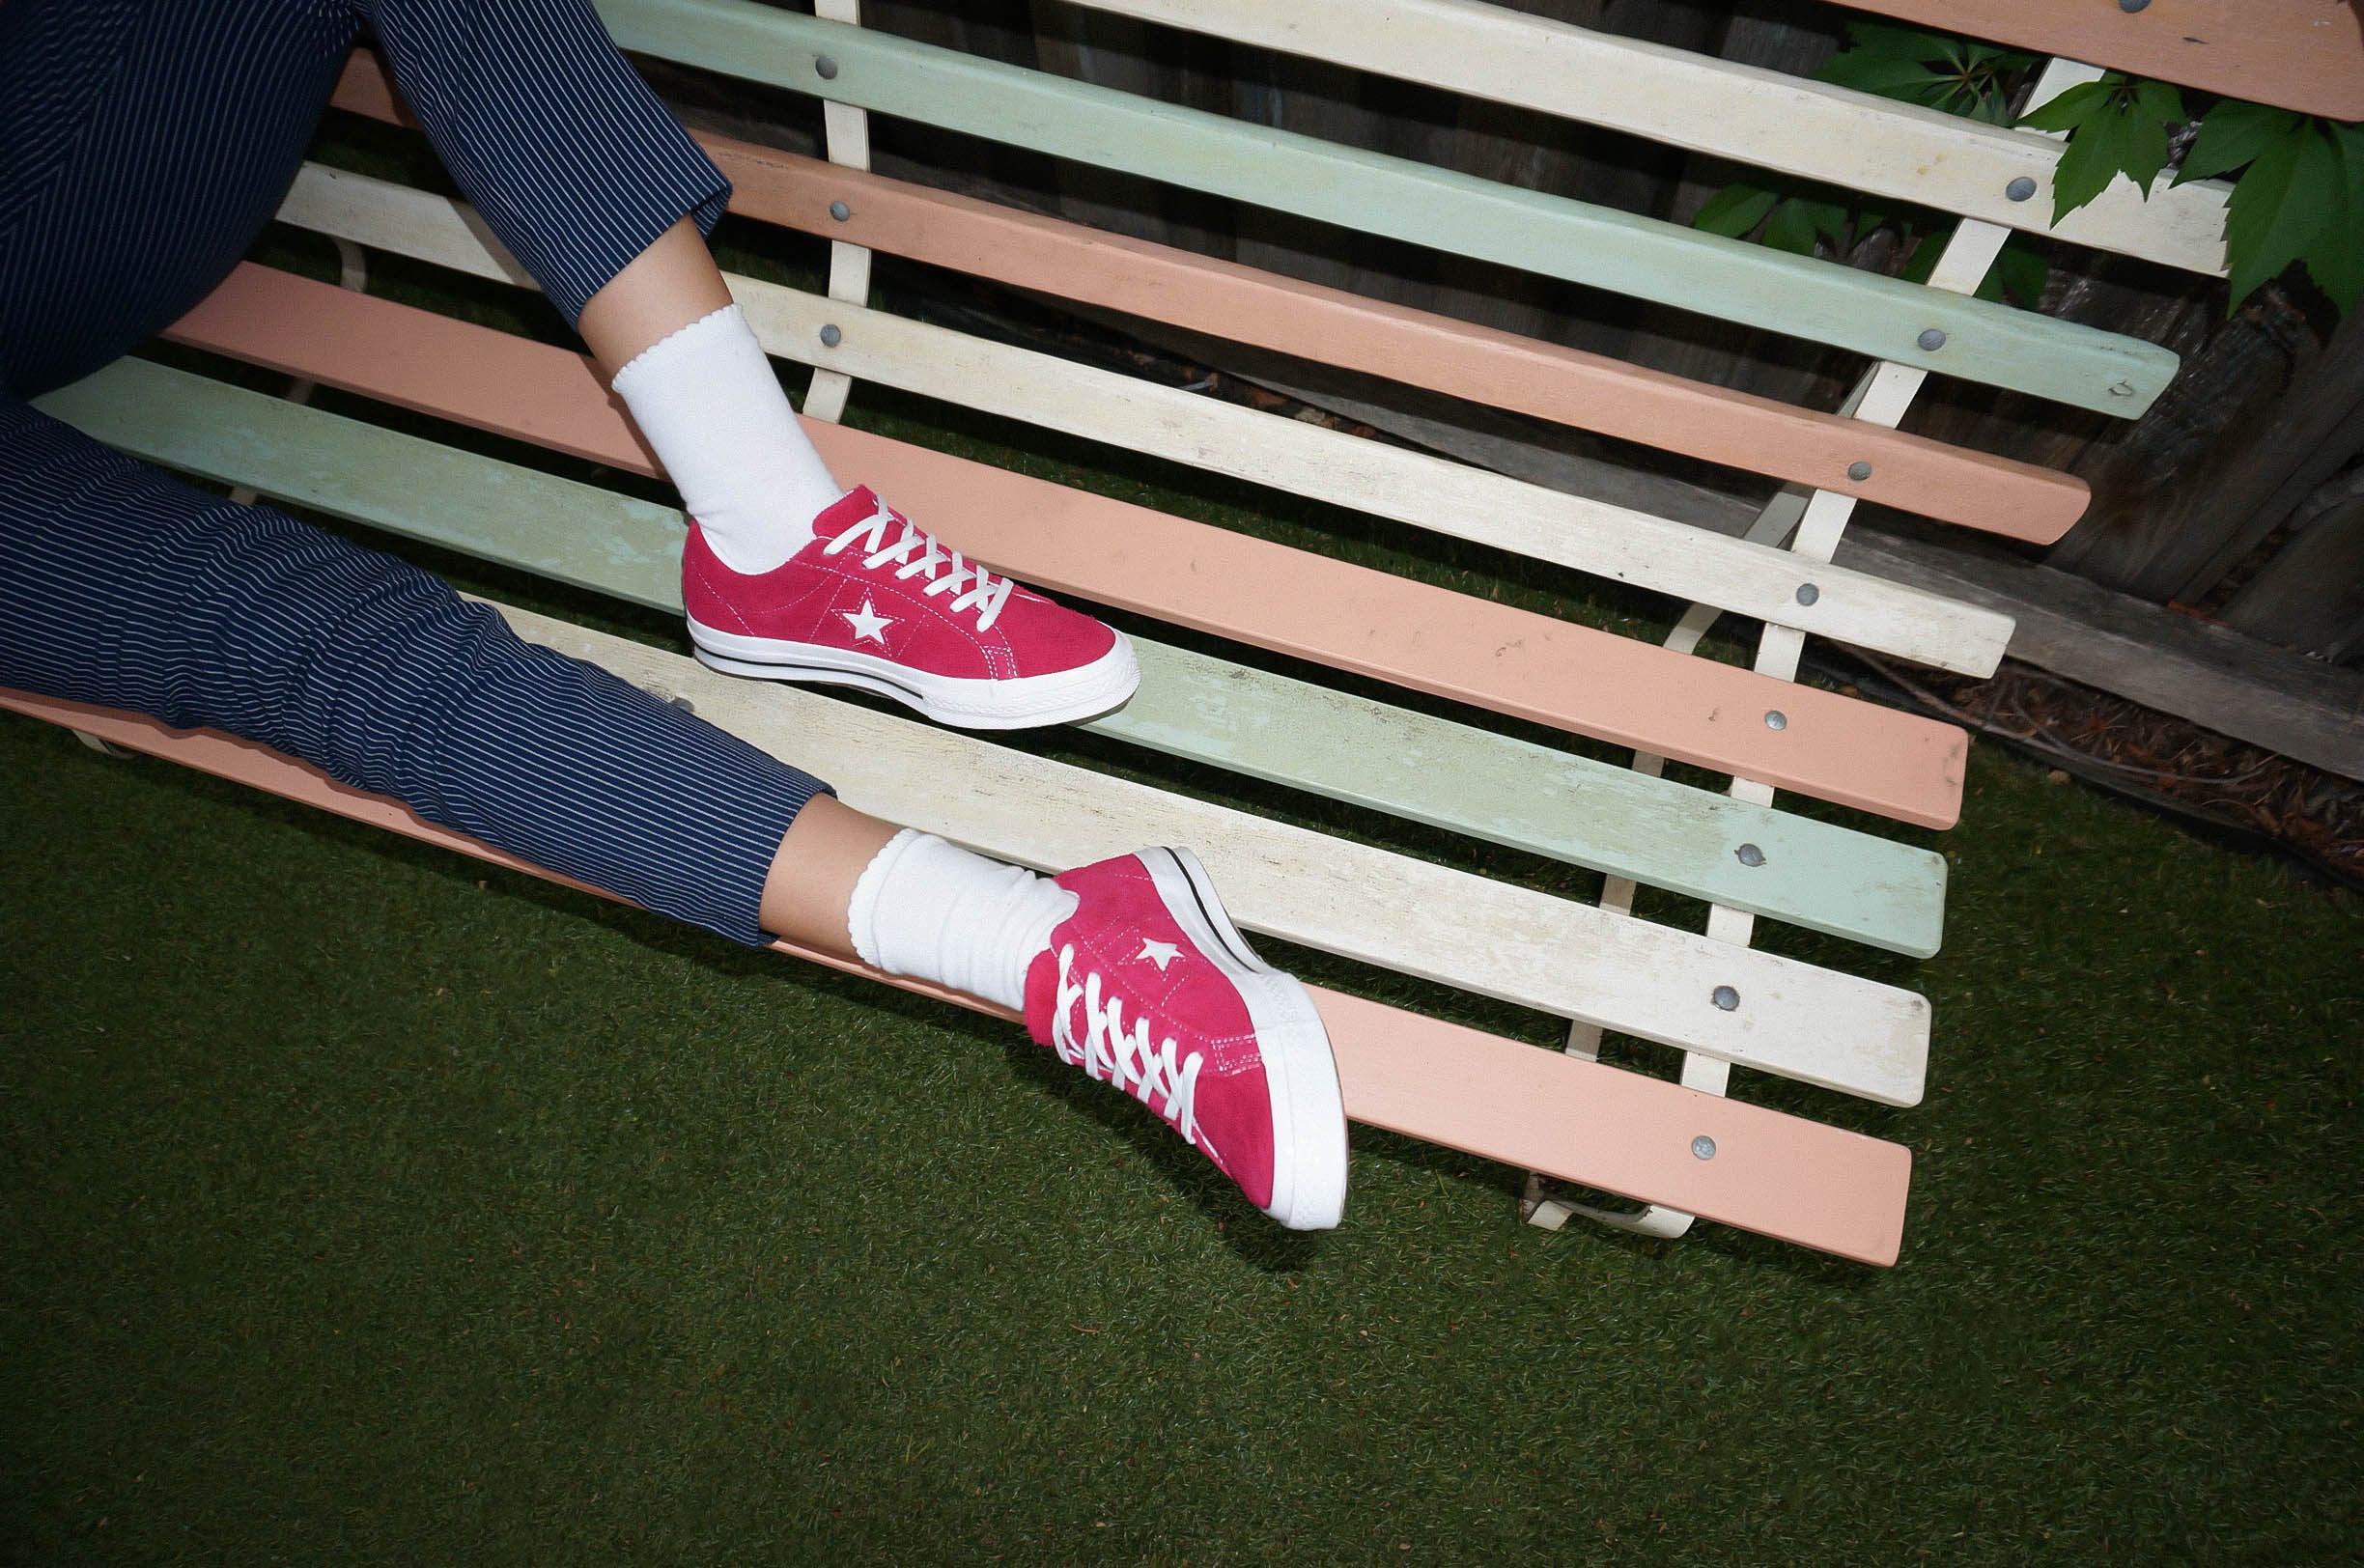 pink boutique trainers